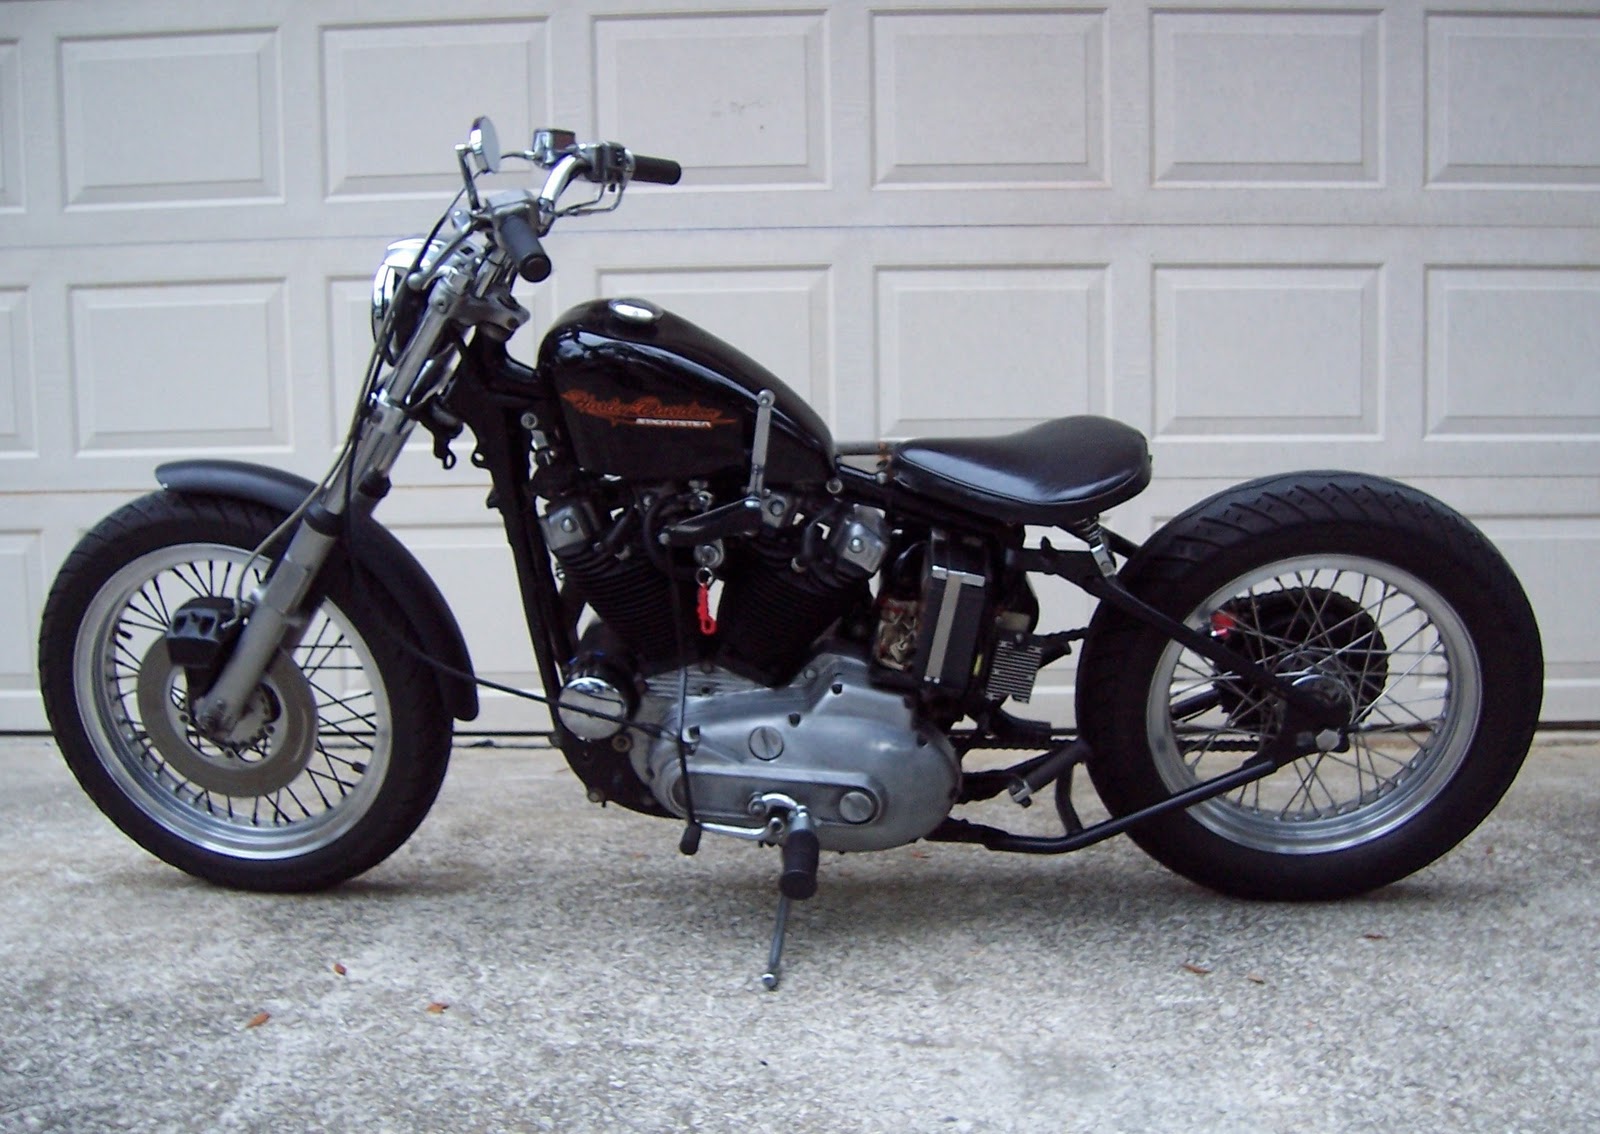 bobber sportster for sale  done here is an updated on the 77 harley sportster ironhead project